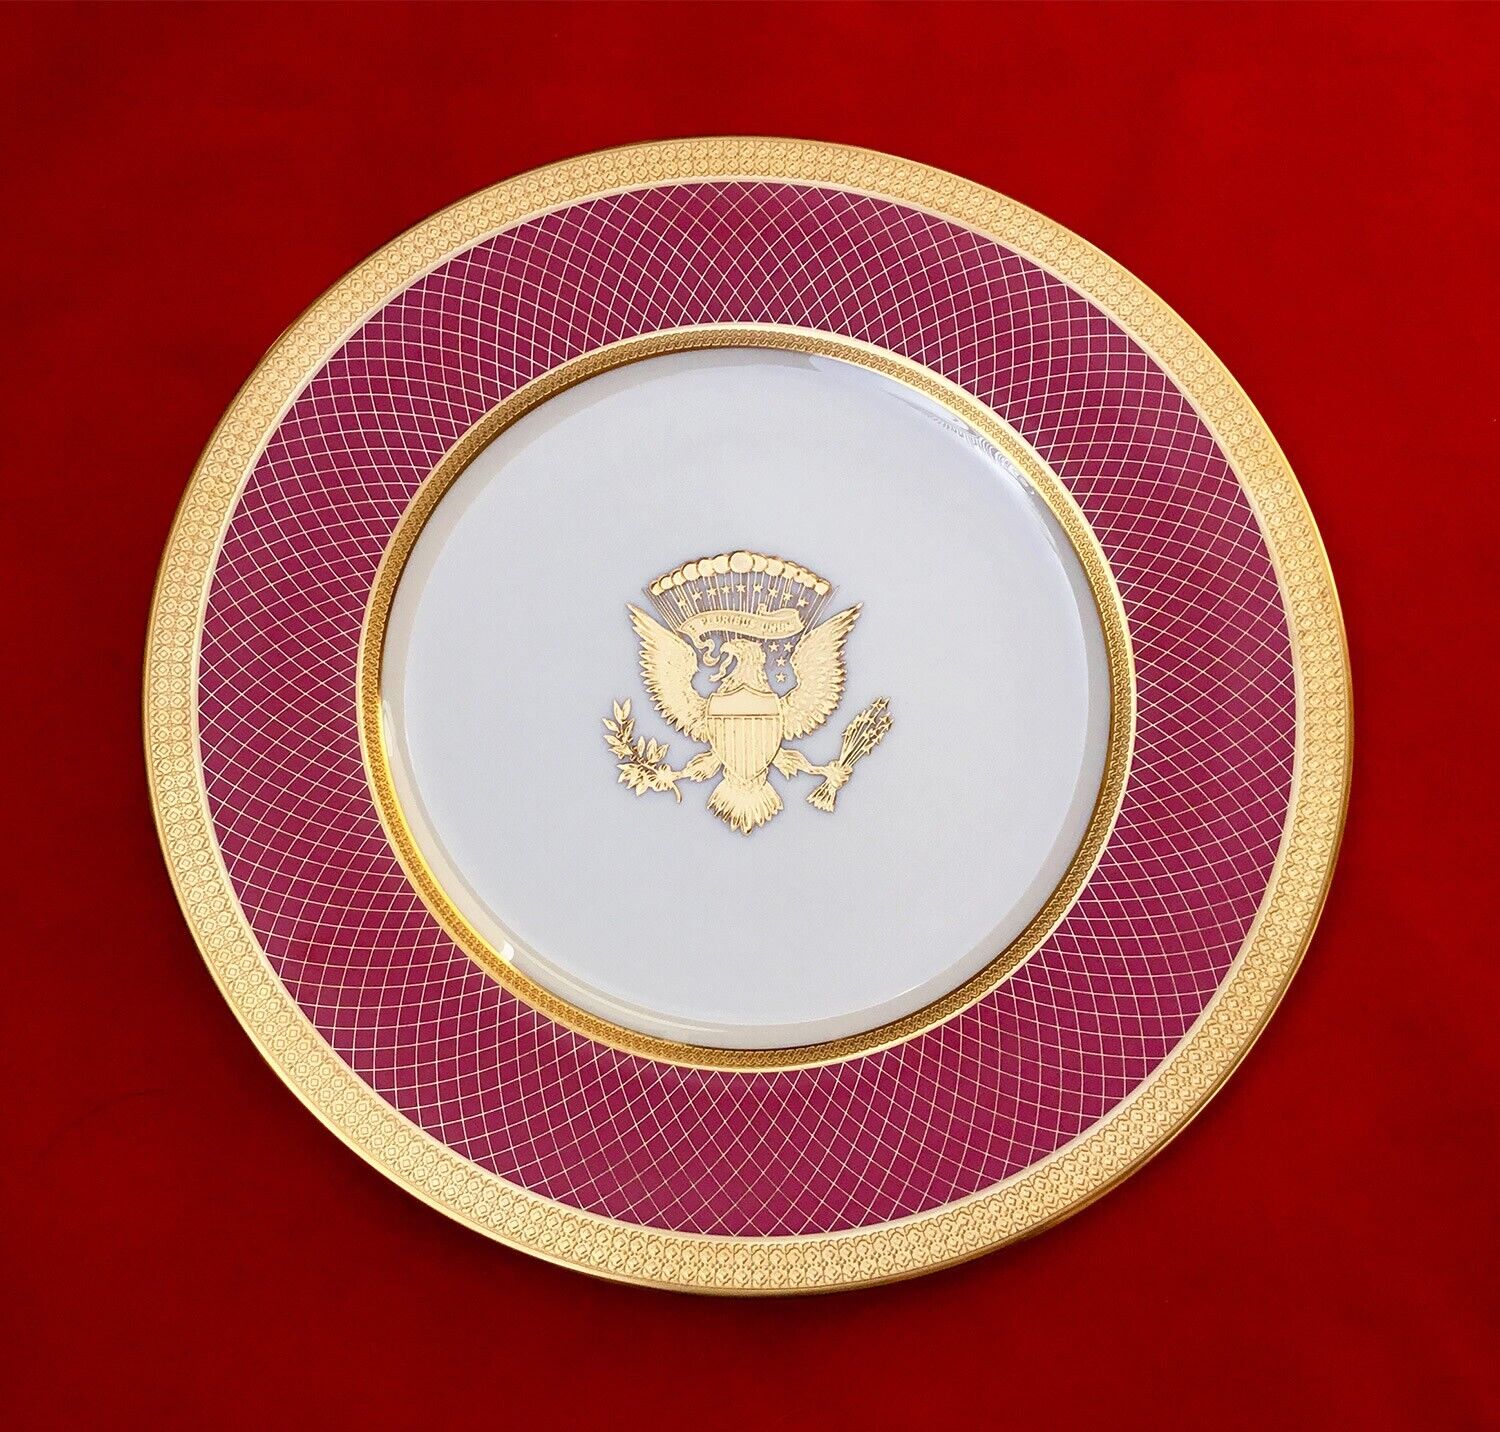 (EXTREMELY SCARCE) PRESIDENT RONALD REAGAN - OFFICIAL INAUGURAL CHARGER PLATE